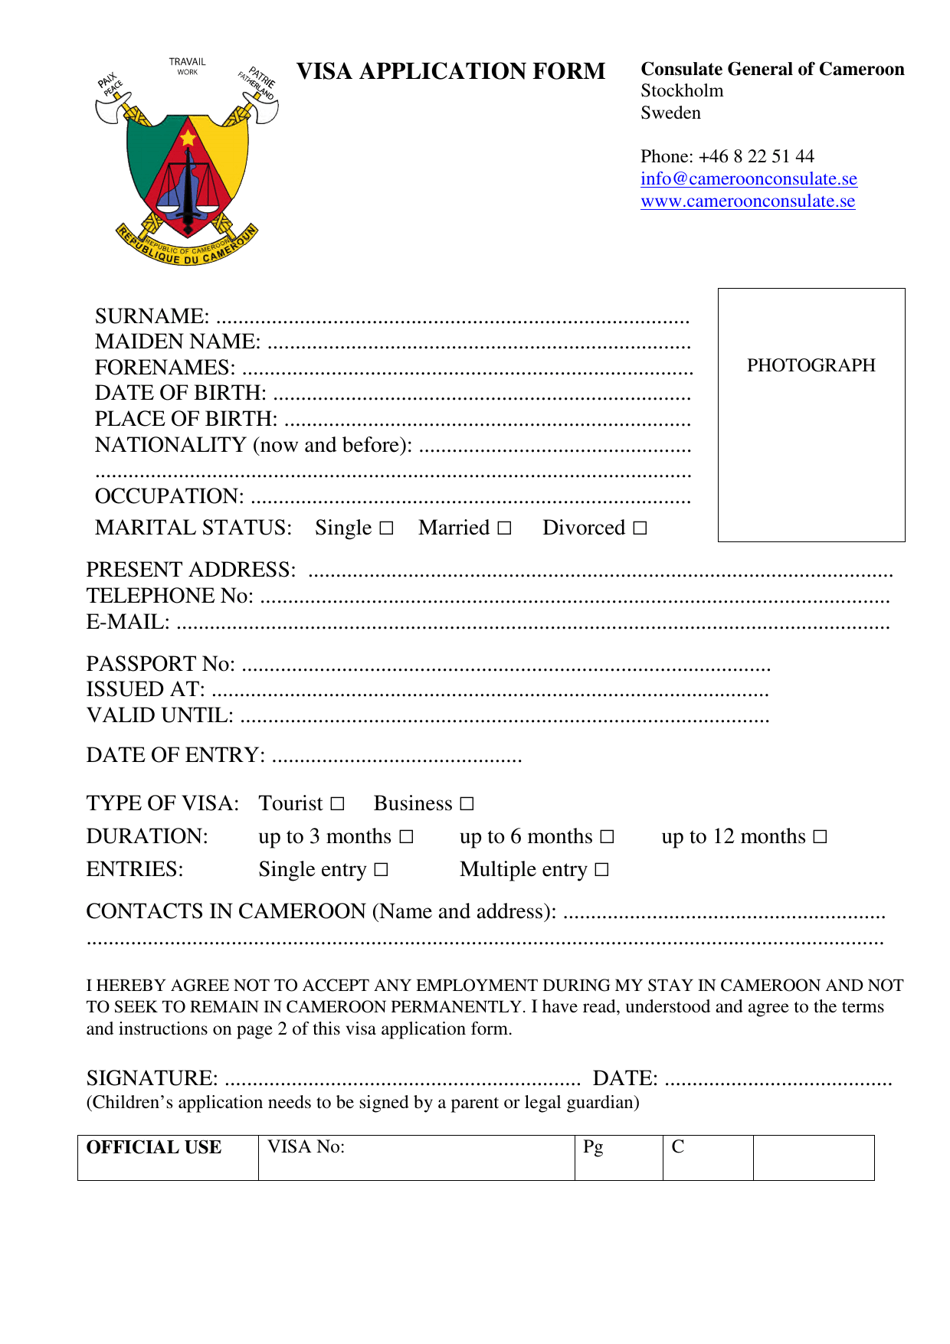 Cameroon Visa Application Form - Consulate General of Cameroon - Stockholm, Sweden, Page 1